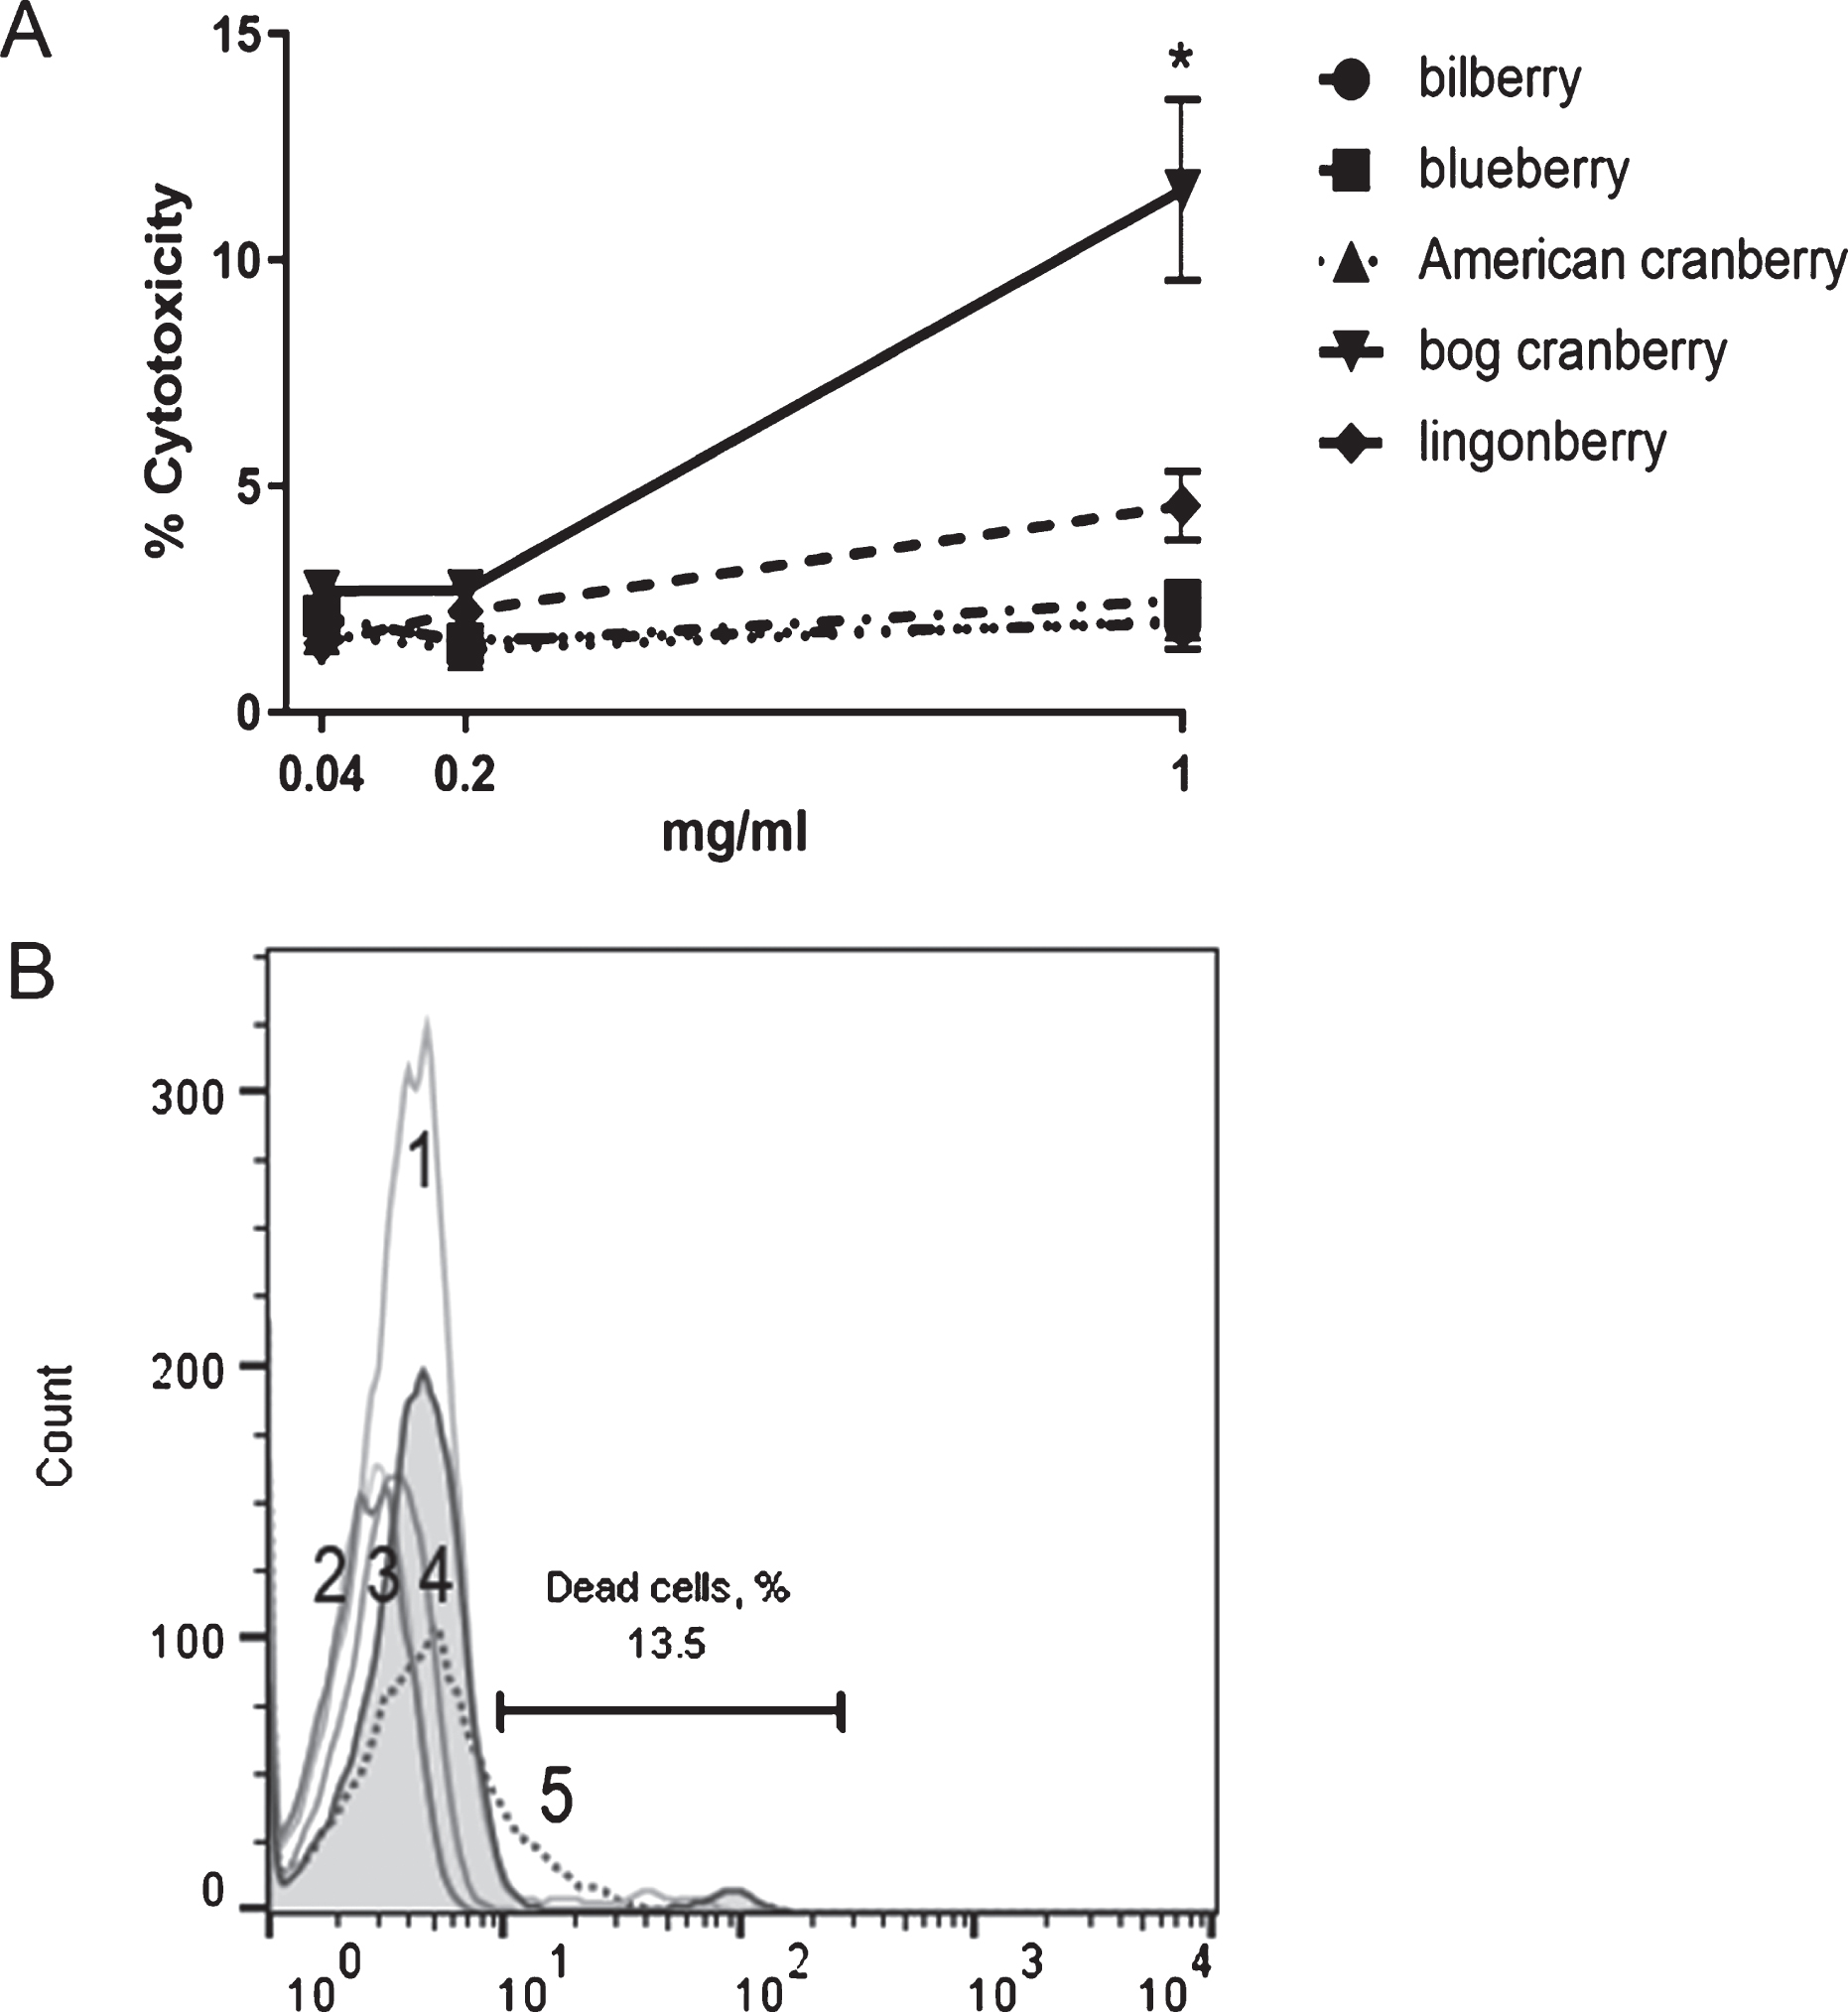 THP-1 cell viability after incubation with bilberry, blueberry, American cranberry, bog cranberry, and lingonberry pomace extracts. A – cytotoxicity (ViaCount) assay results (n = 3), B – viability of THP-1 cells after incubation with 1 mg/mL berry pomace extracts in ViaCount flow cytometry assay. Filled histogram – cells without extract, gray lines – bilberry (1), blueberry (2), American cranberry (3), lingonberry (4), and dotted line – bog cranberry extract (5). Histogram marker shows cytotoxic events with bog cranberry extract. Representative data are shown. Statistical significance was expressed as *P < 0.05.